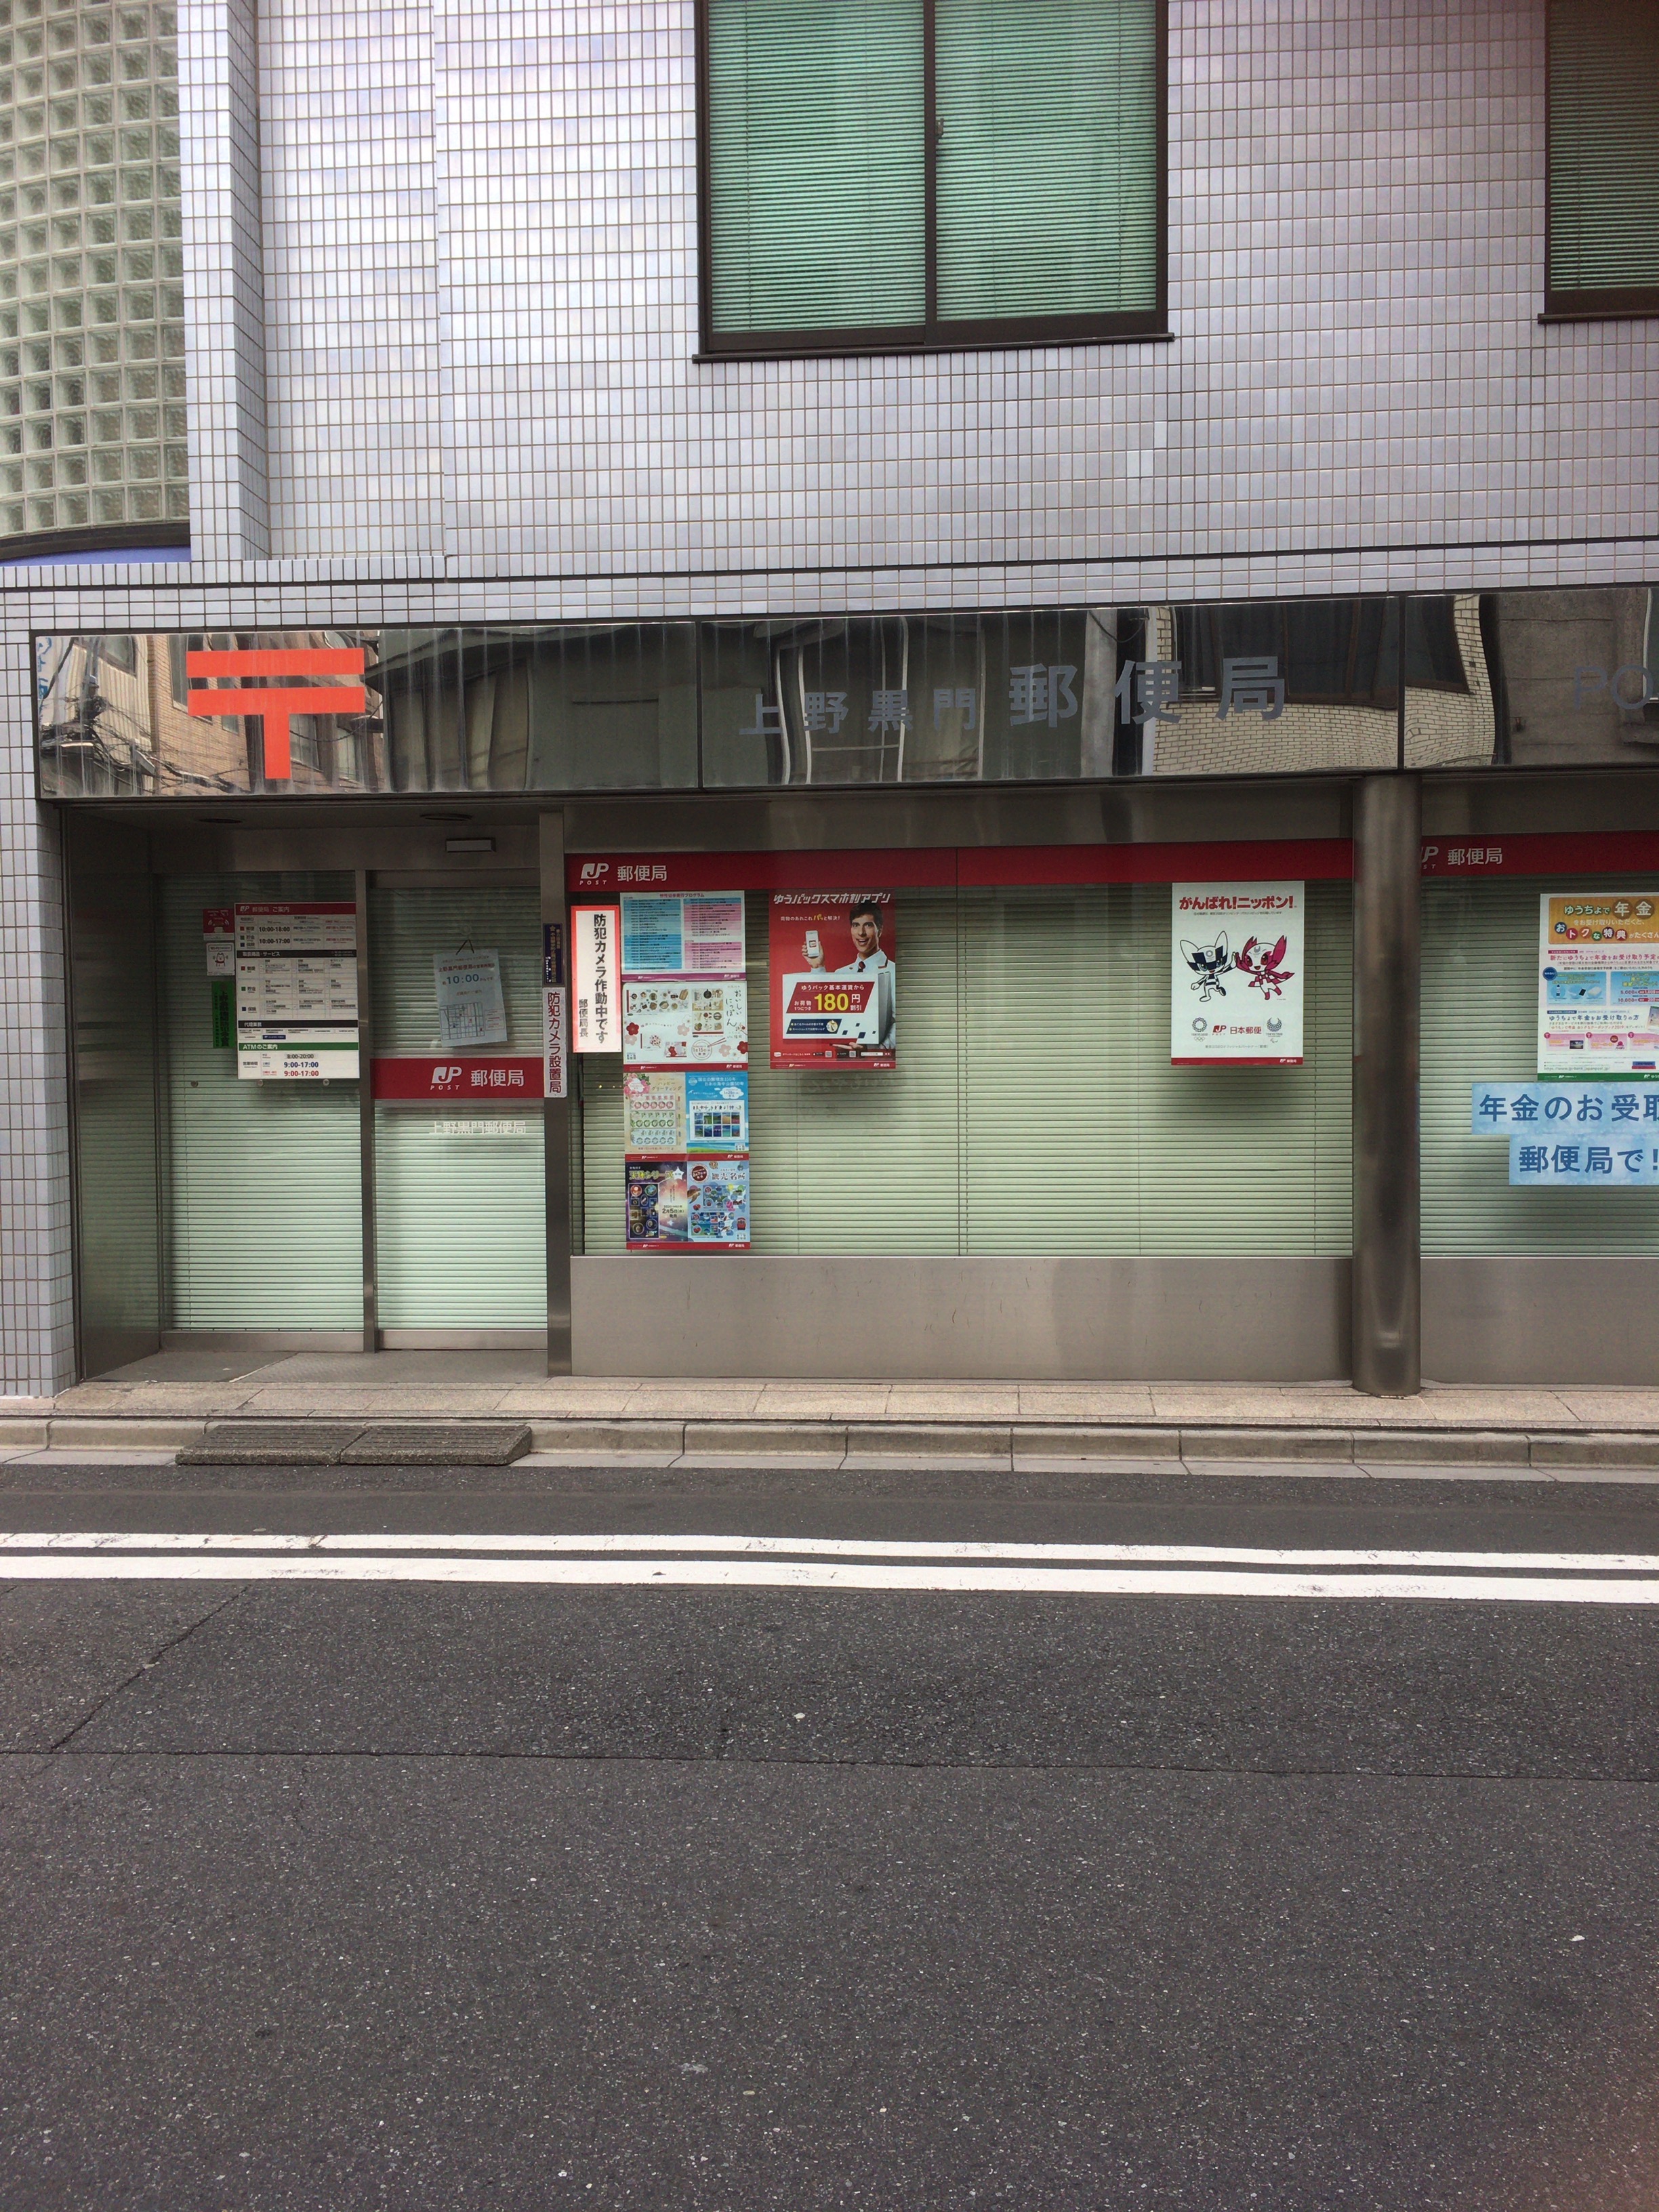 Sending Postcards Luggage And Withdrawing Money In Post Offices Close To Akihabara